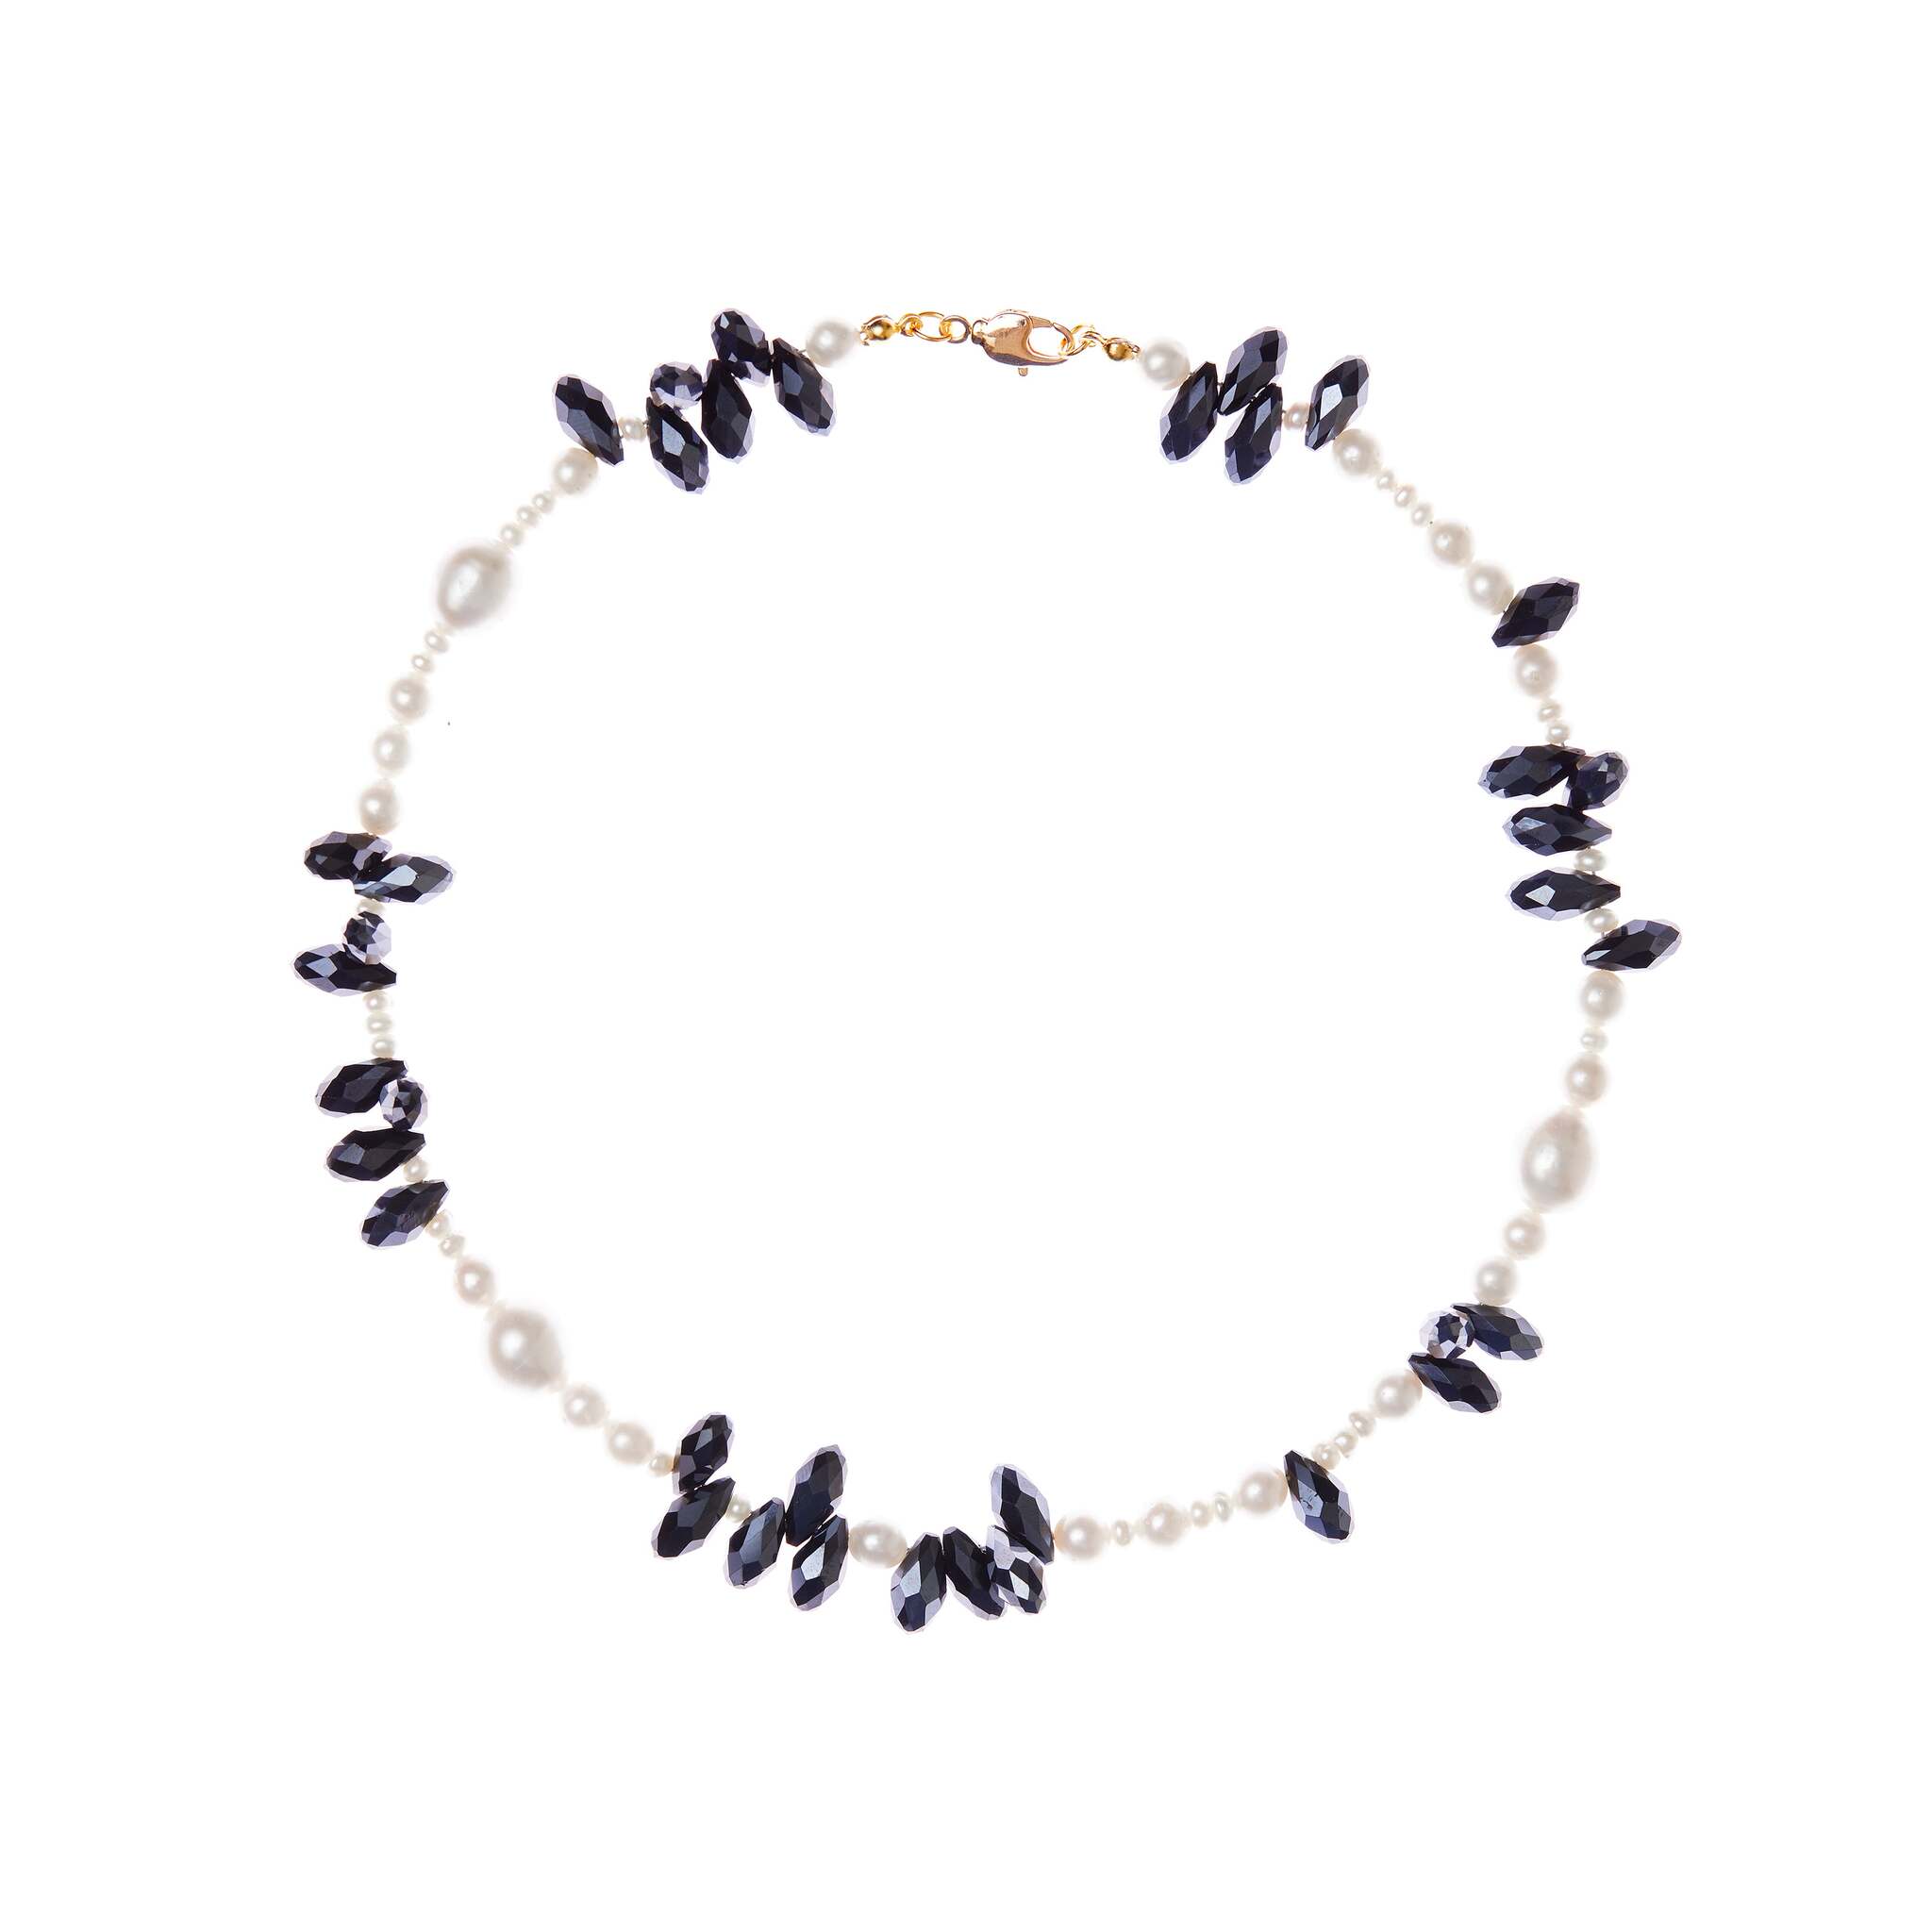 HOLLY JUNE Колье Black And White Crystal Pearl Necklace holly june колье black pearl tie necklace